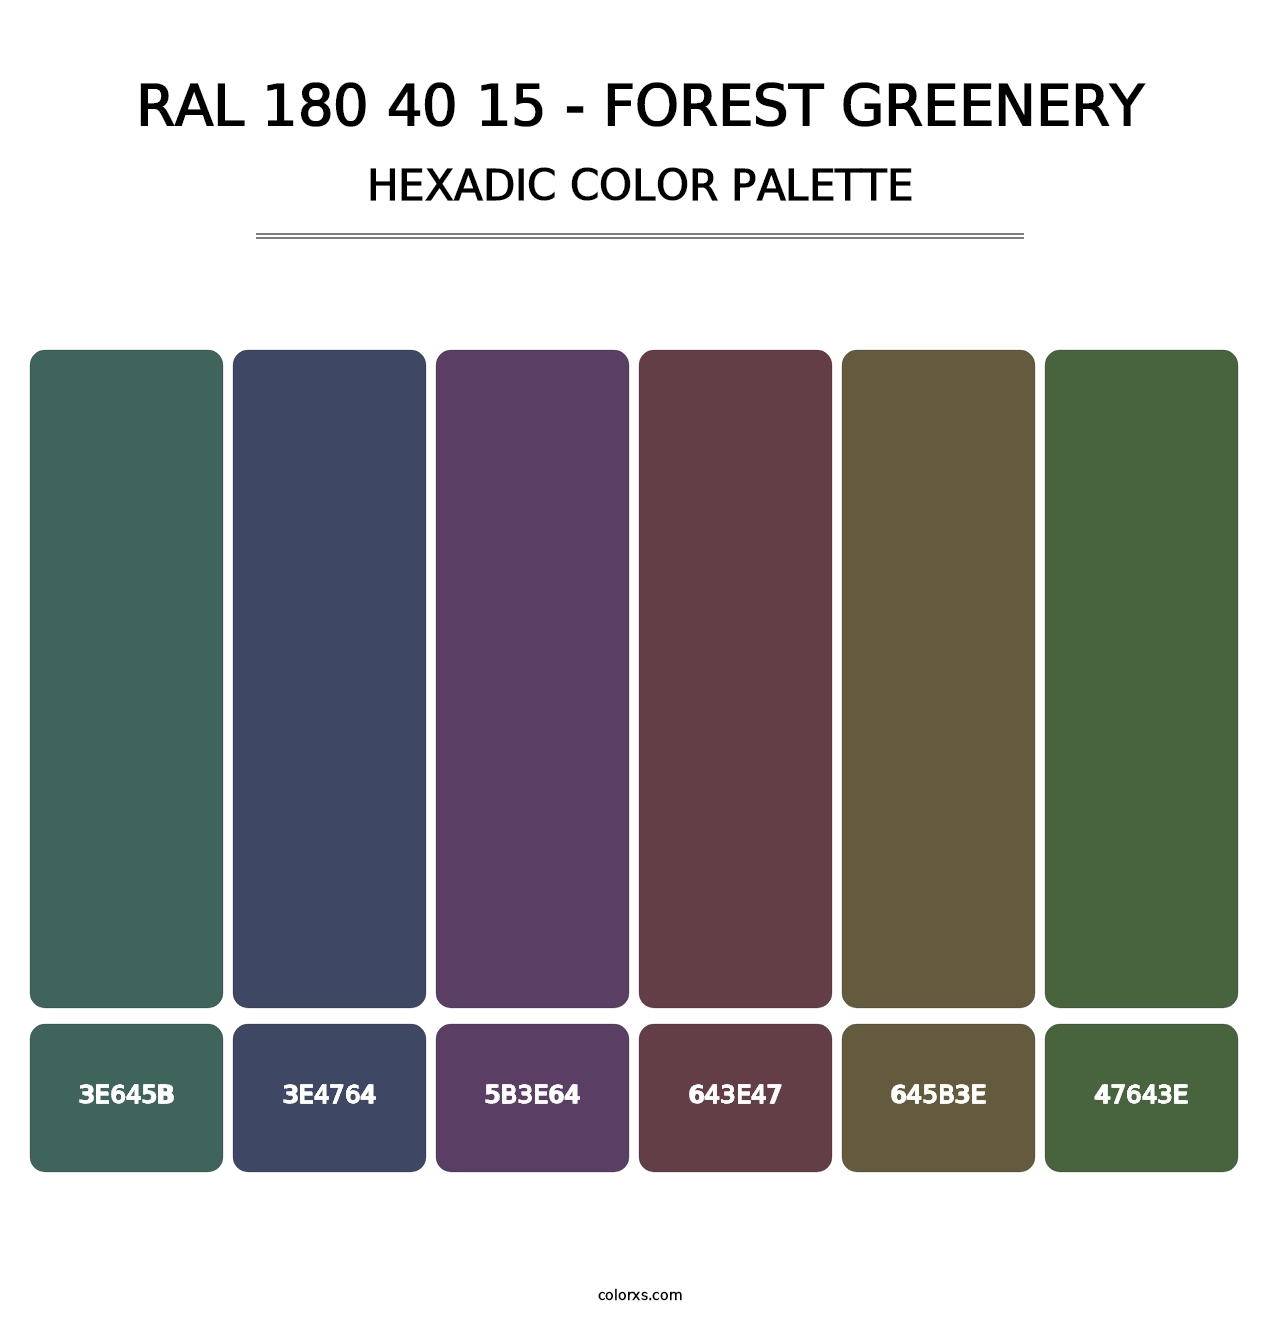 RAL 180 40 15 - Forest Greenery - Hexadic Color Palette